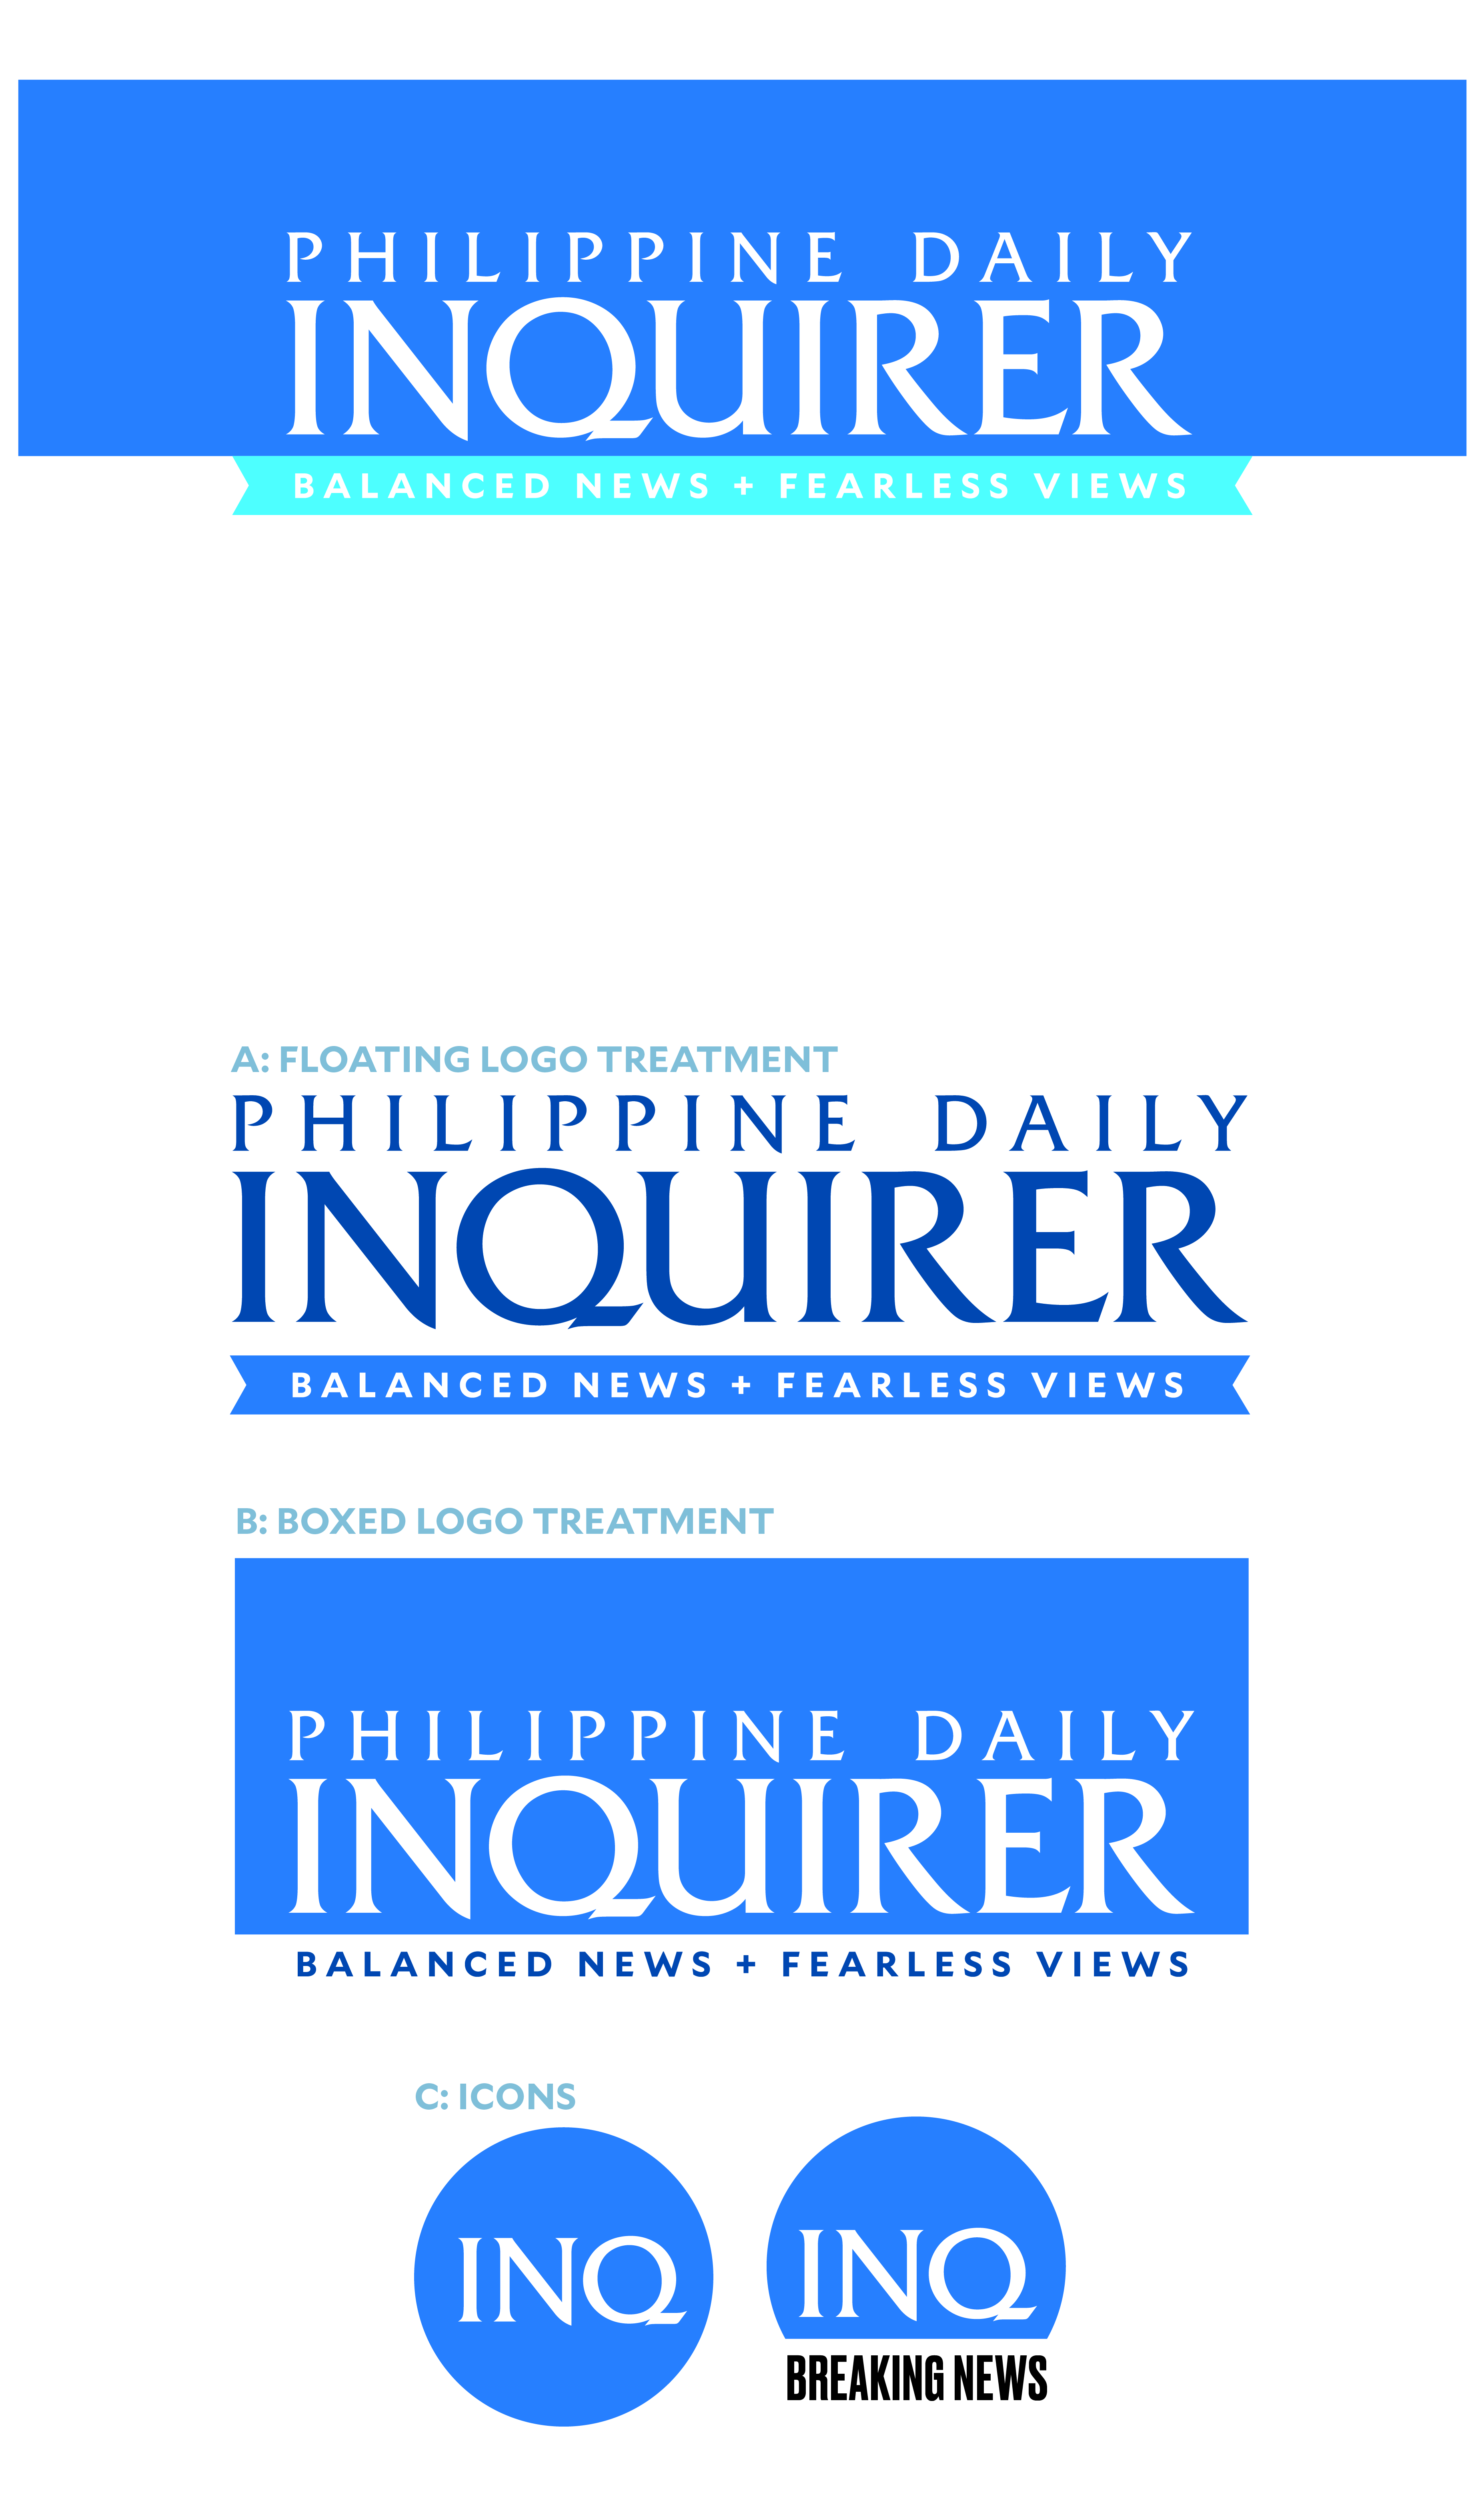 Blog The Philippine Daily Inquirer Its A New Look New Rethink Across Platforms × García Media